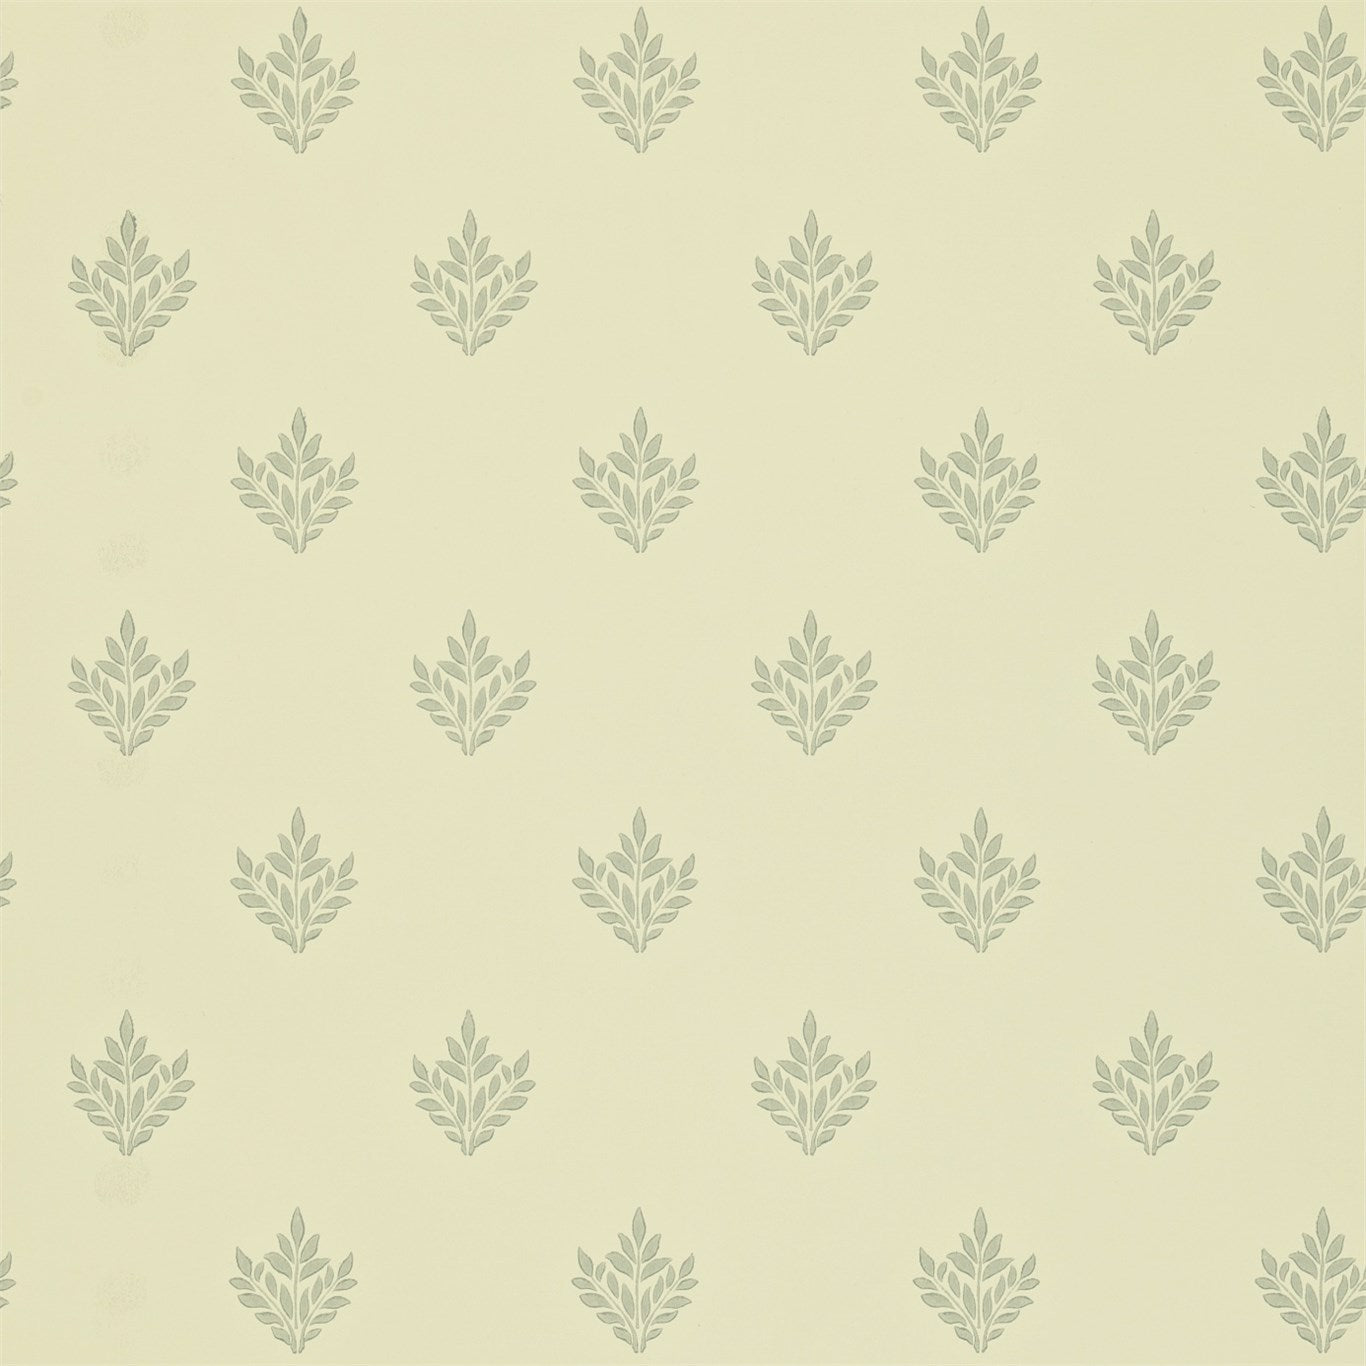 Pearwood Wallpaper DMCW210460 by Morris & Co